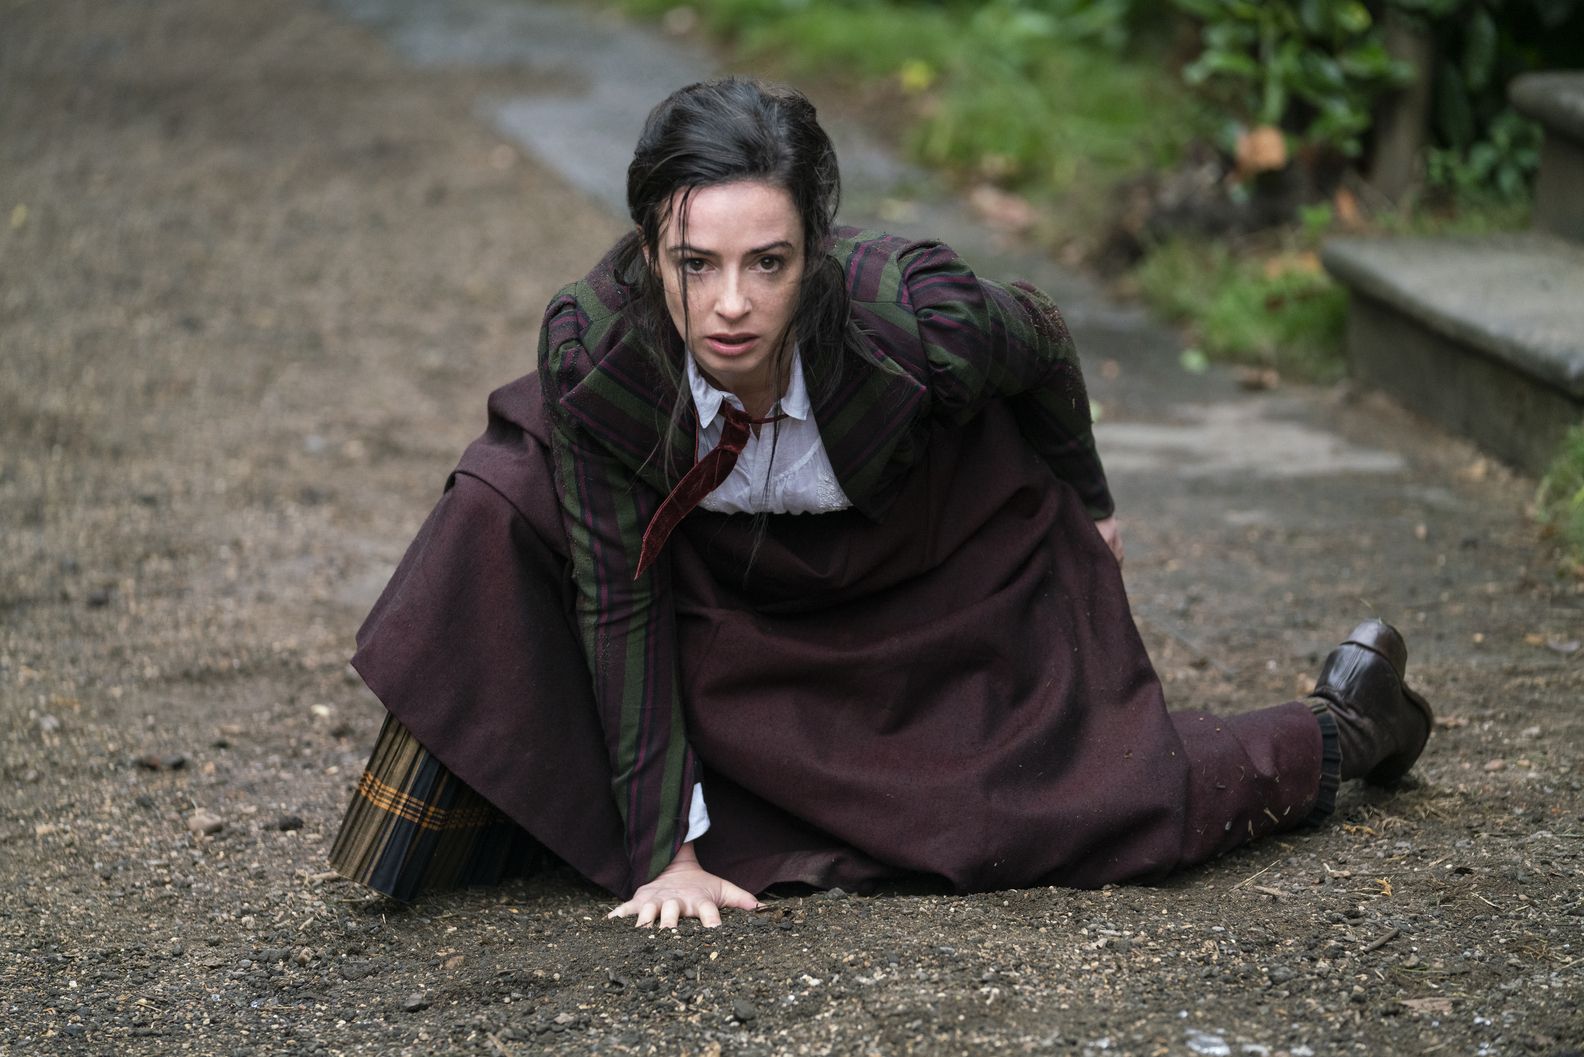 Laura donnelly images